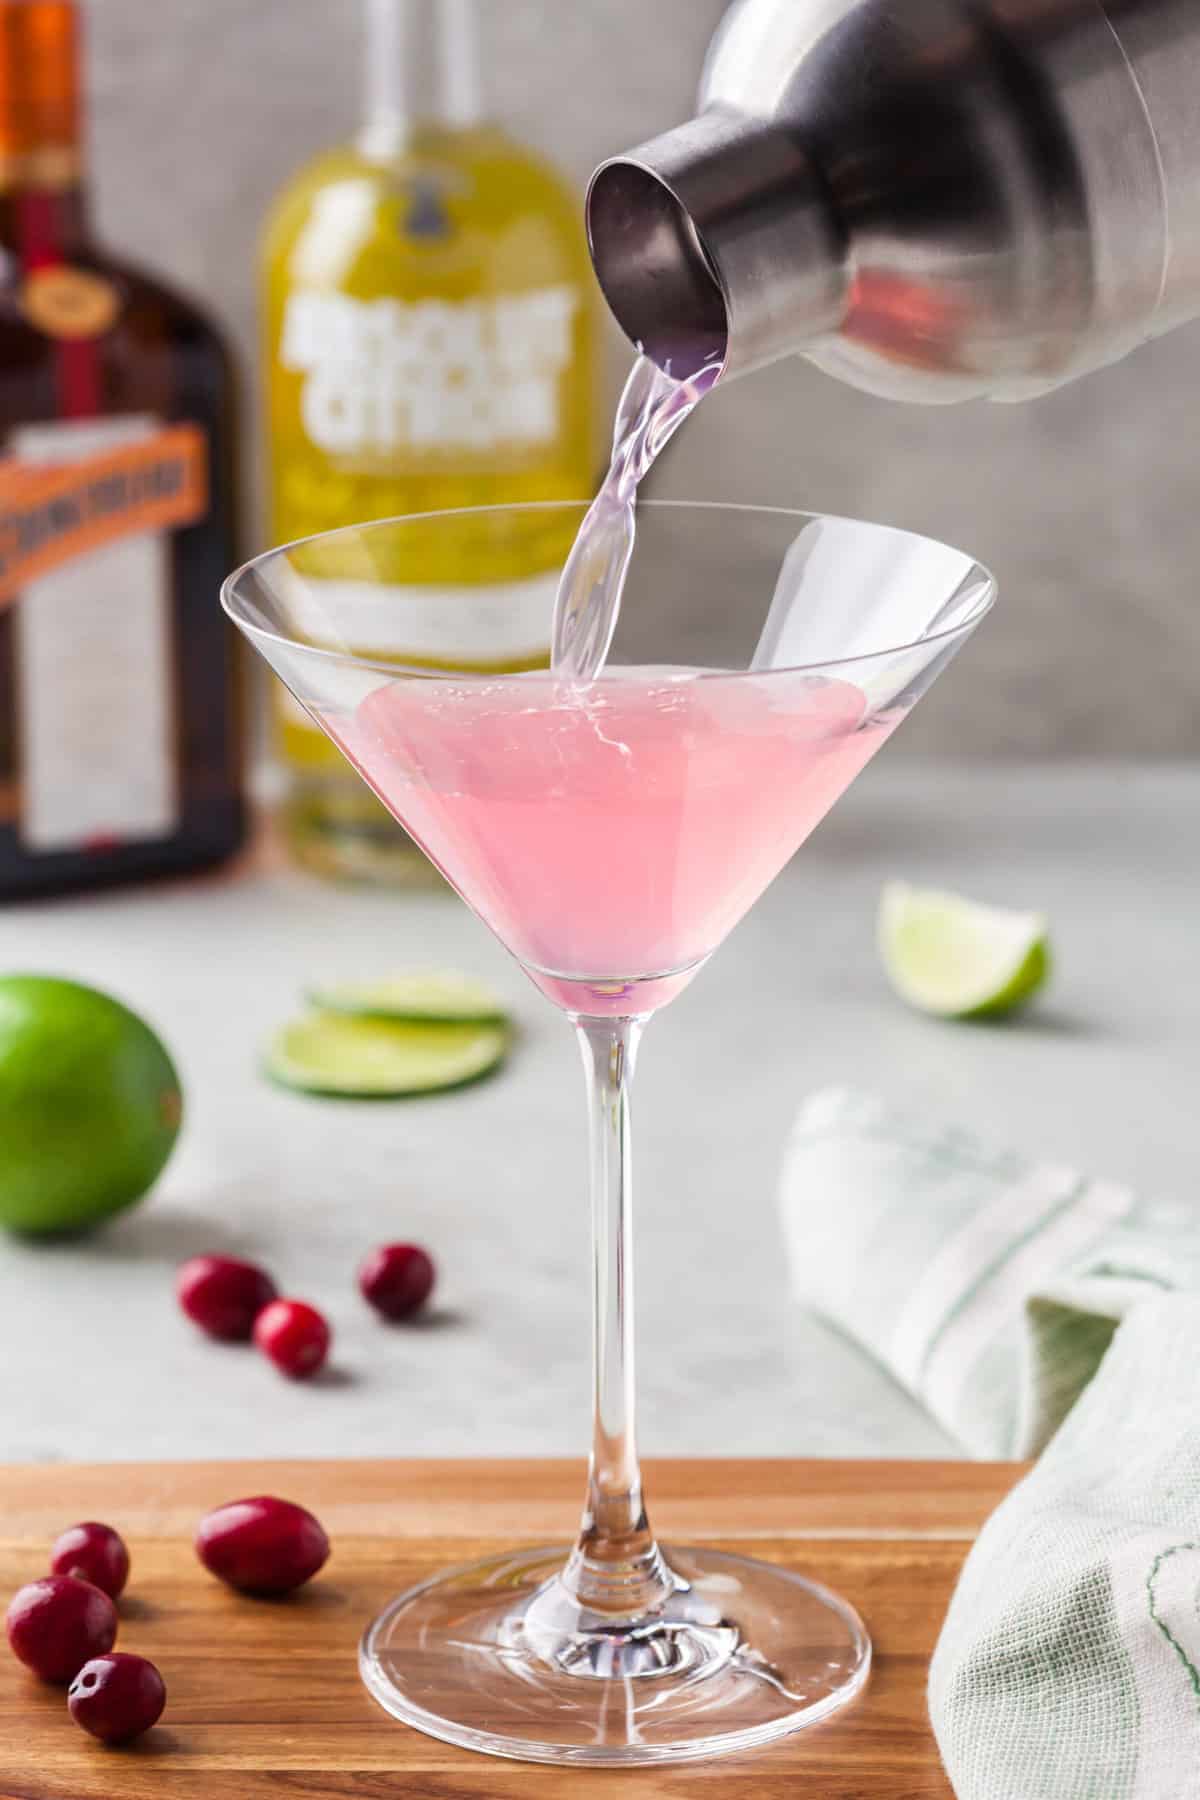 A cosmo is being poured into a martini glass.